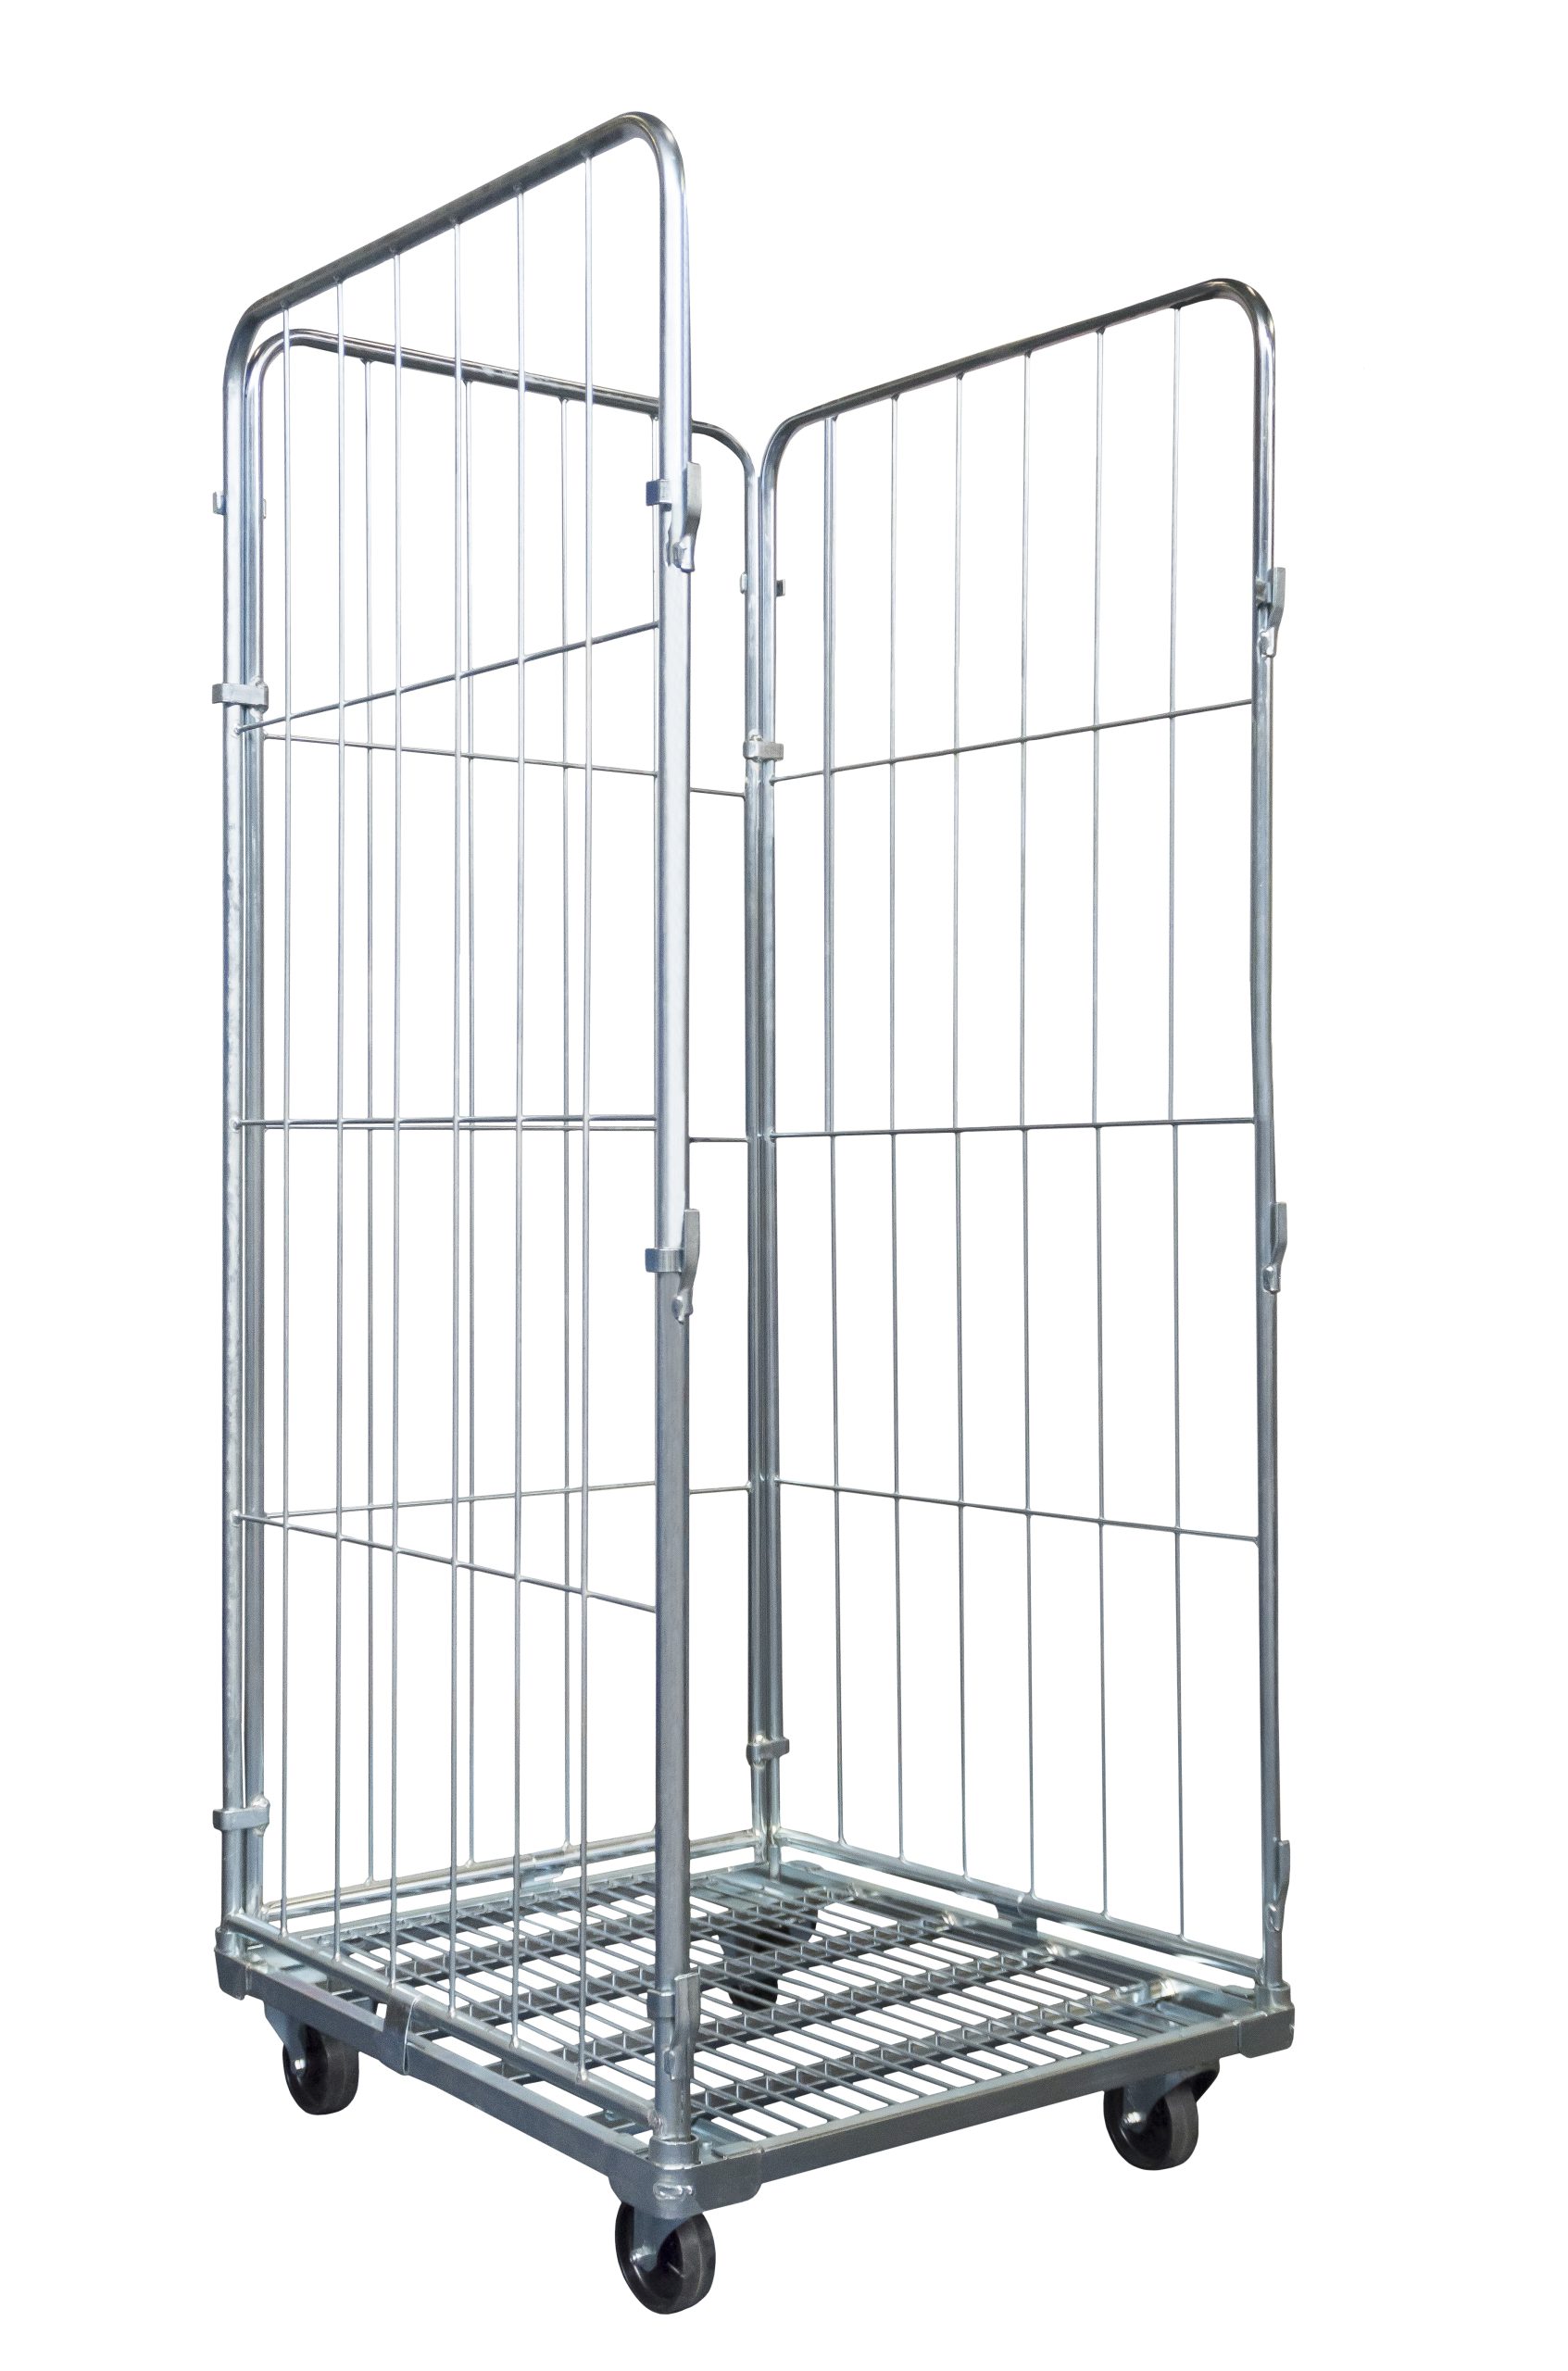 Hinged 400 Gate, Laundry kg rent 800x720x1800 for Front Container mm Rotomrent Load | Cage Roll Capacity